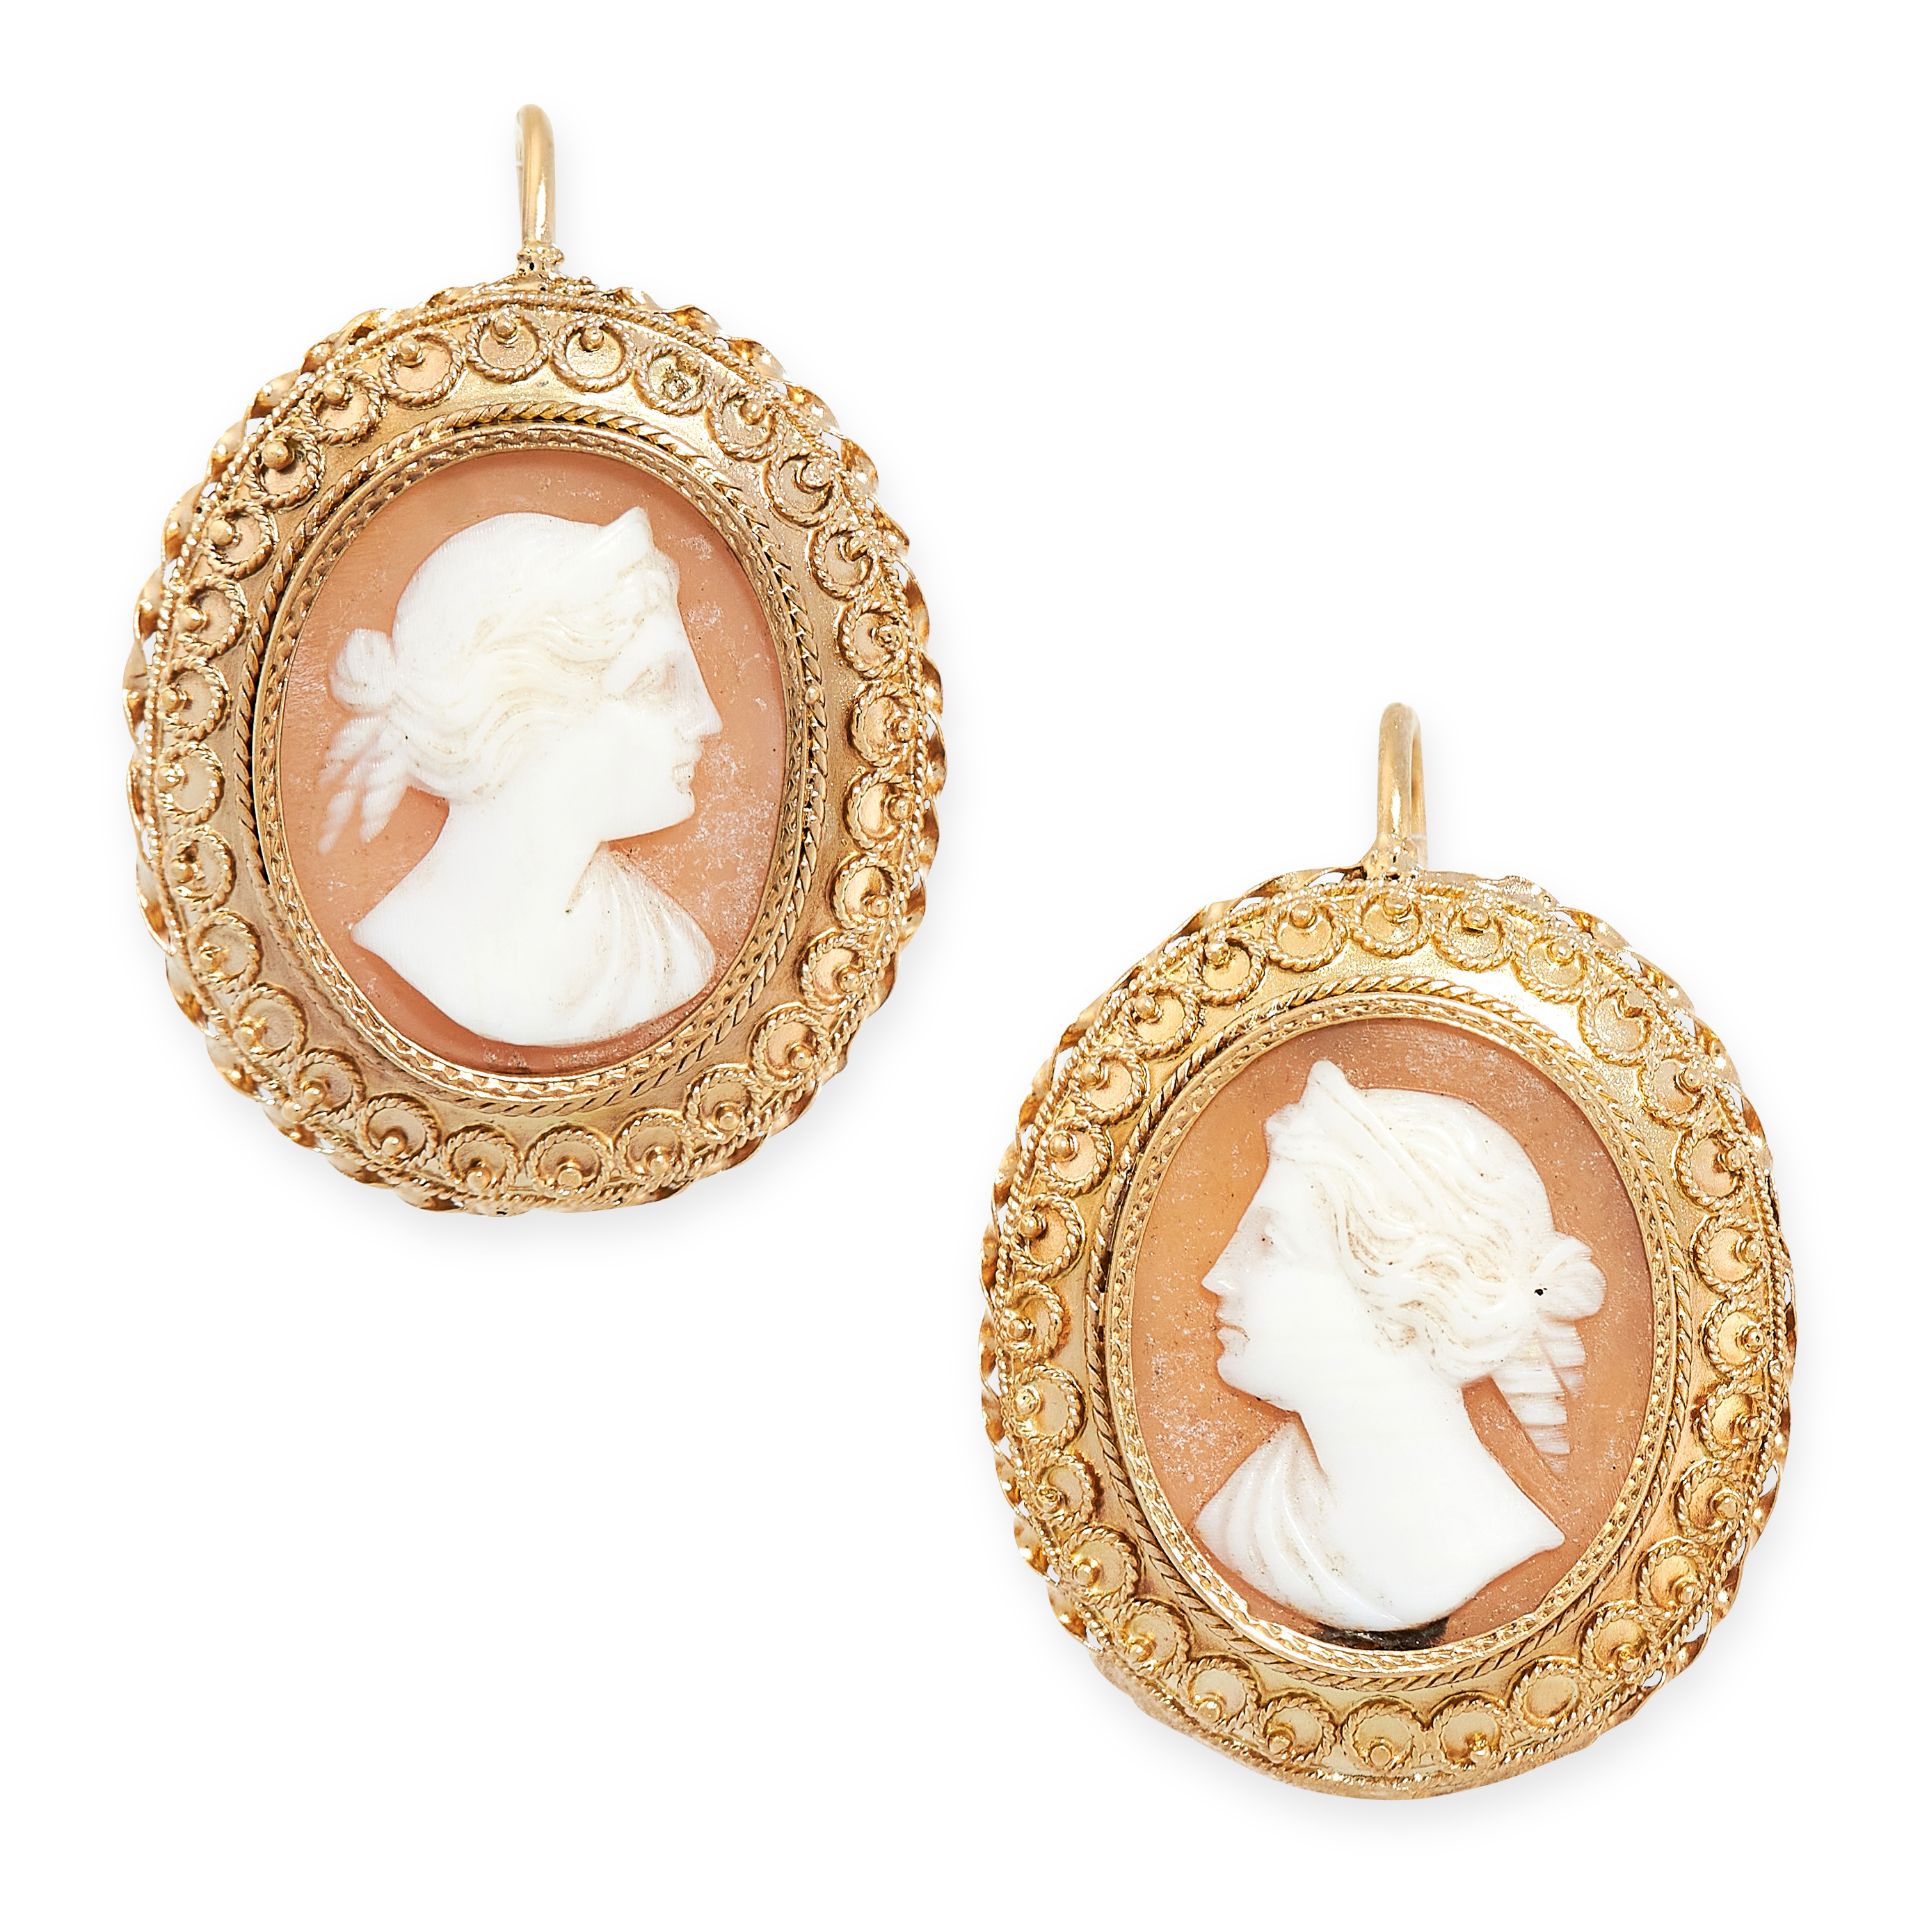 A PAIR OF ANTIQUE CAMEO EARRINGS in yellow gold, in the Etruscan revival manner, each set with an